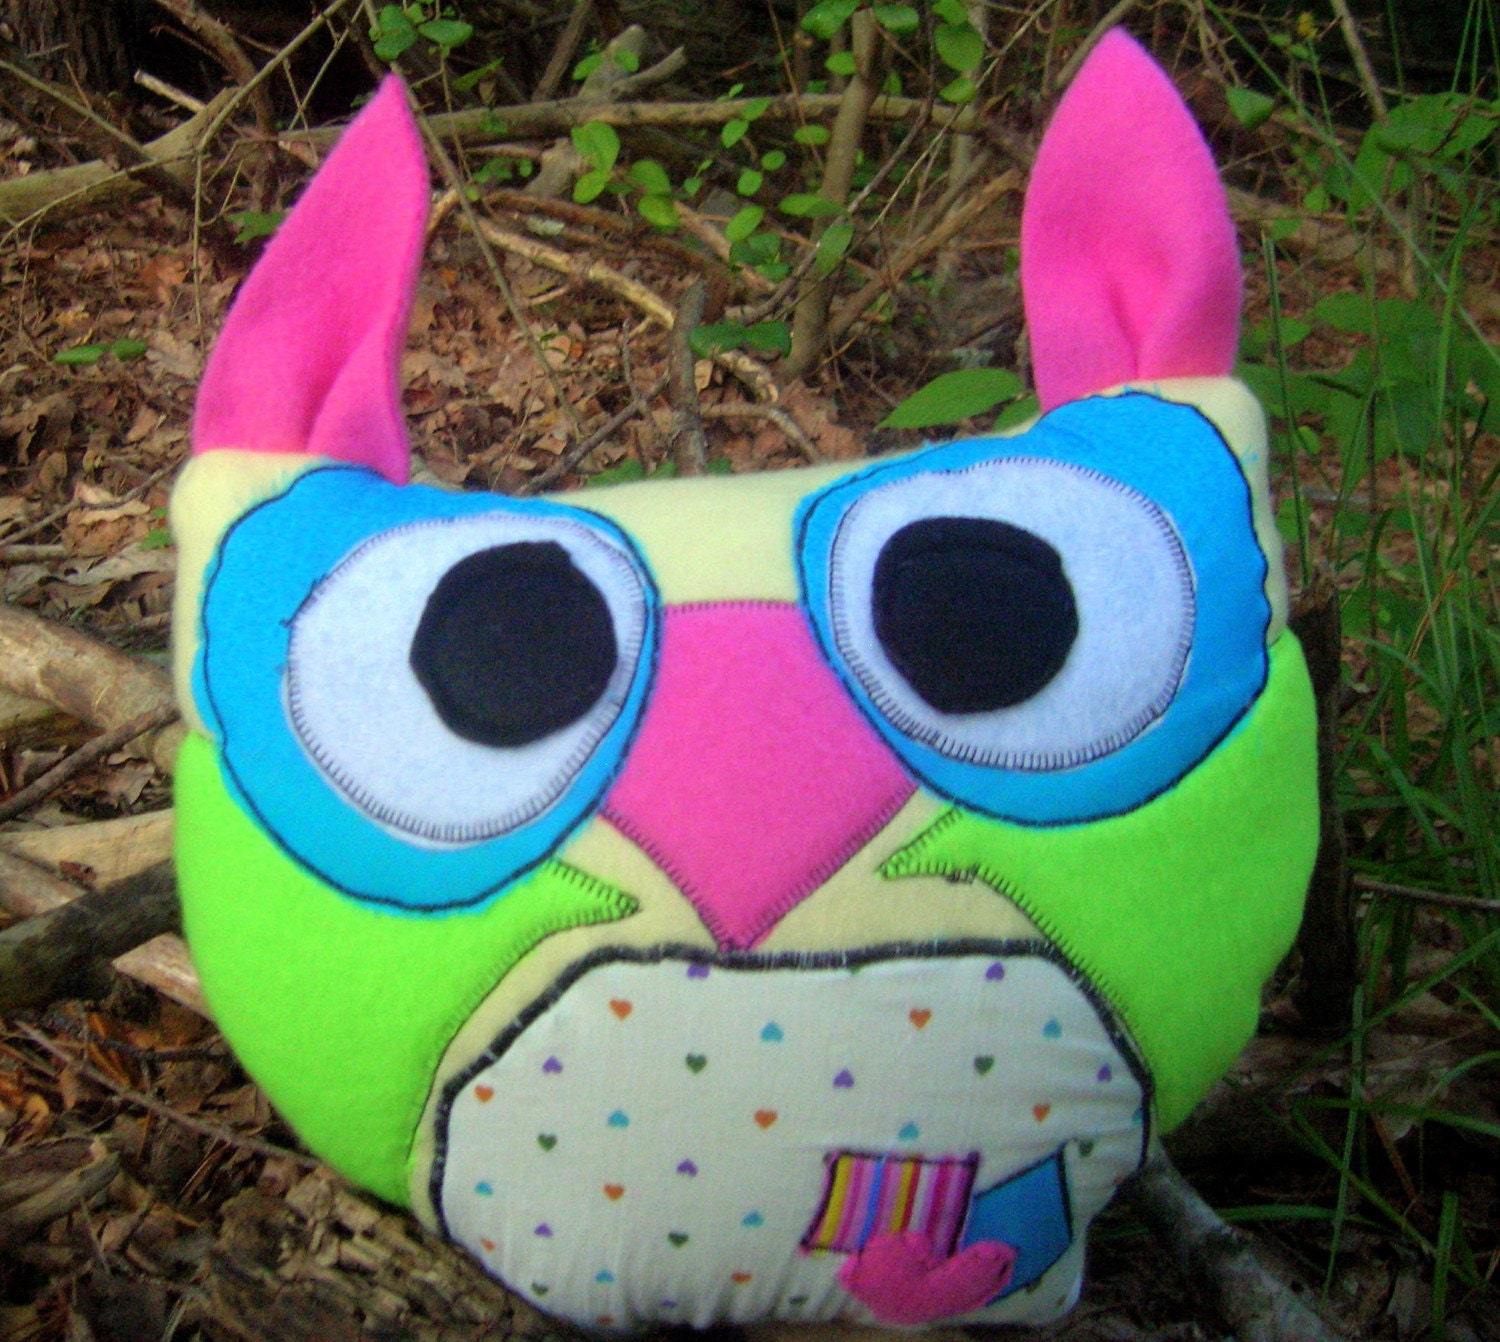 Patches the Psychedelic Love Owl